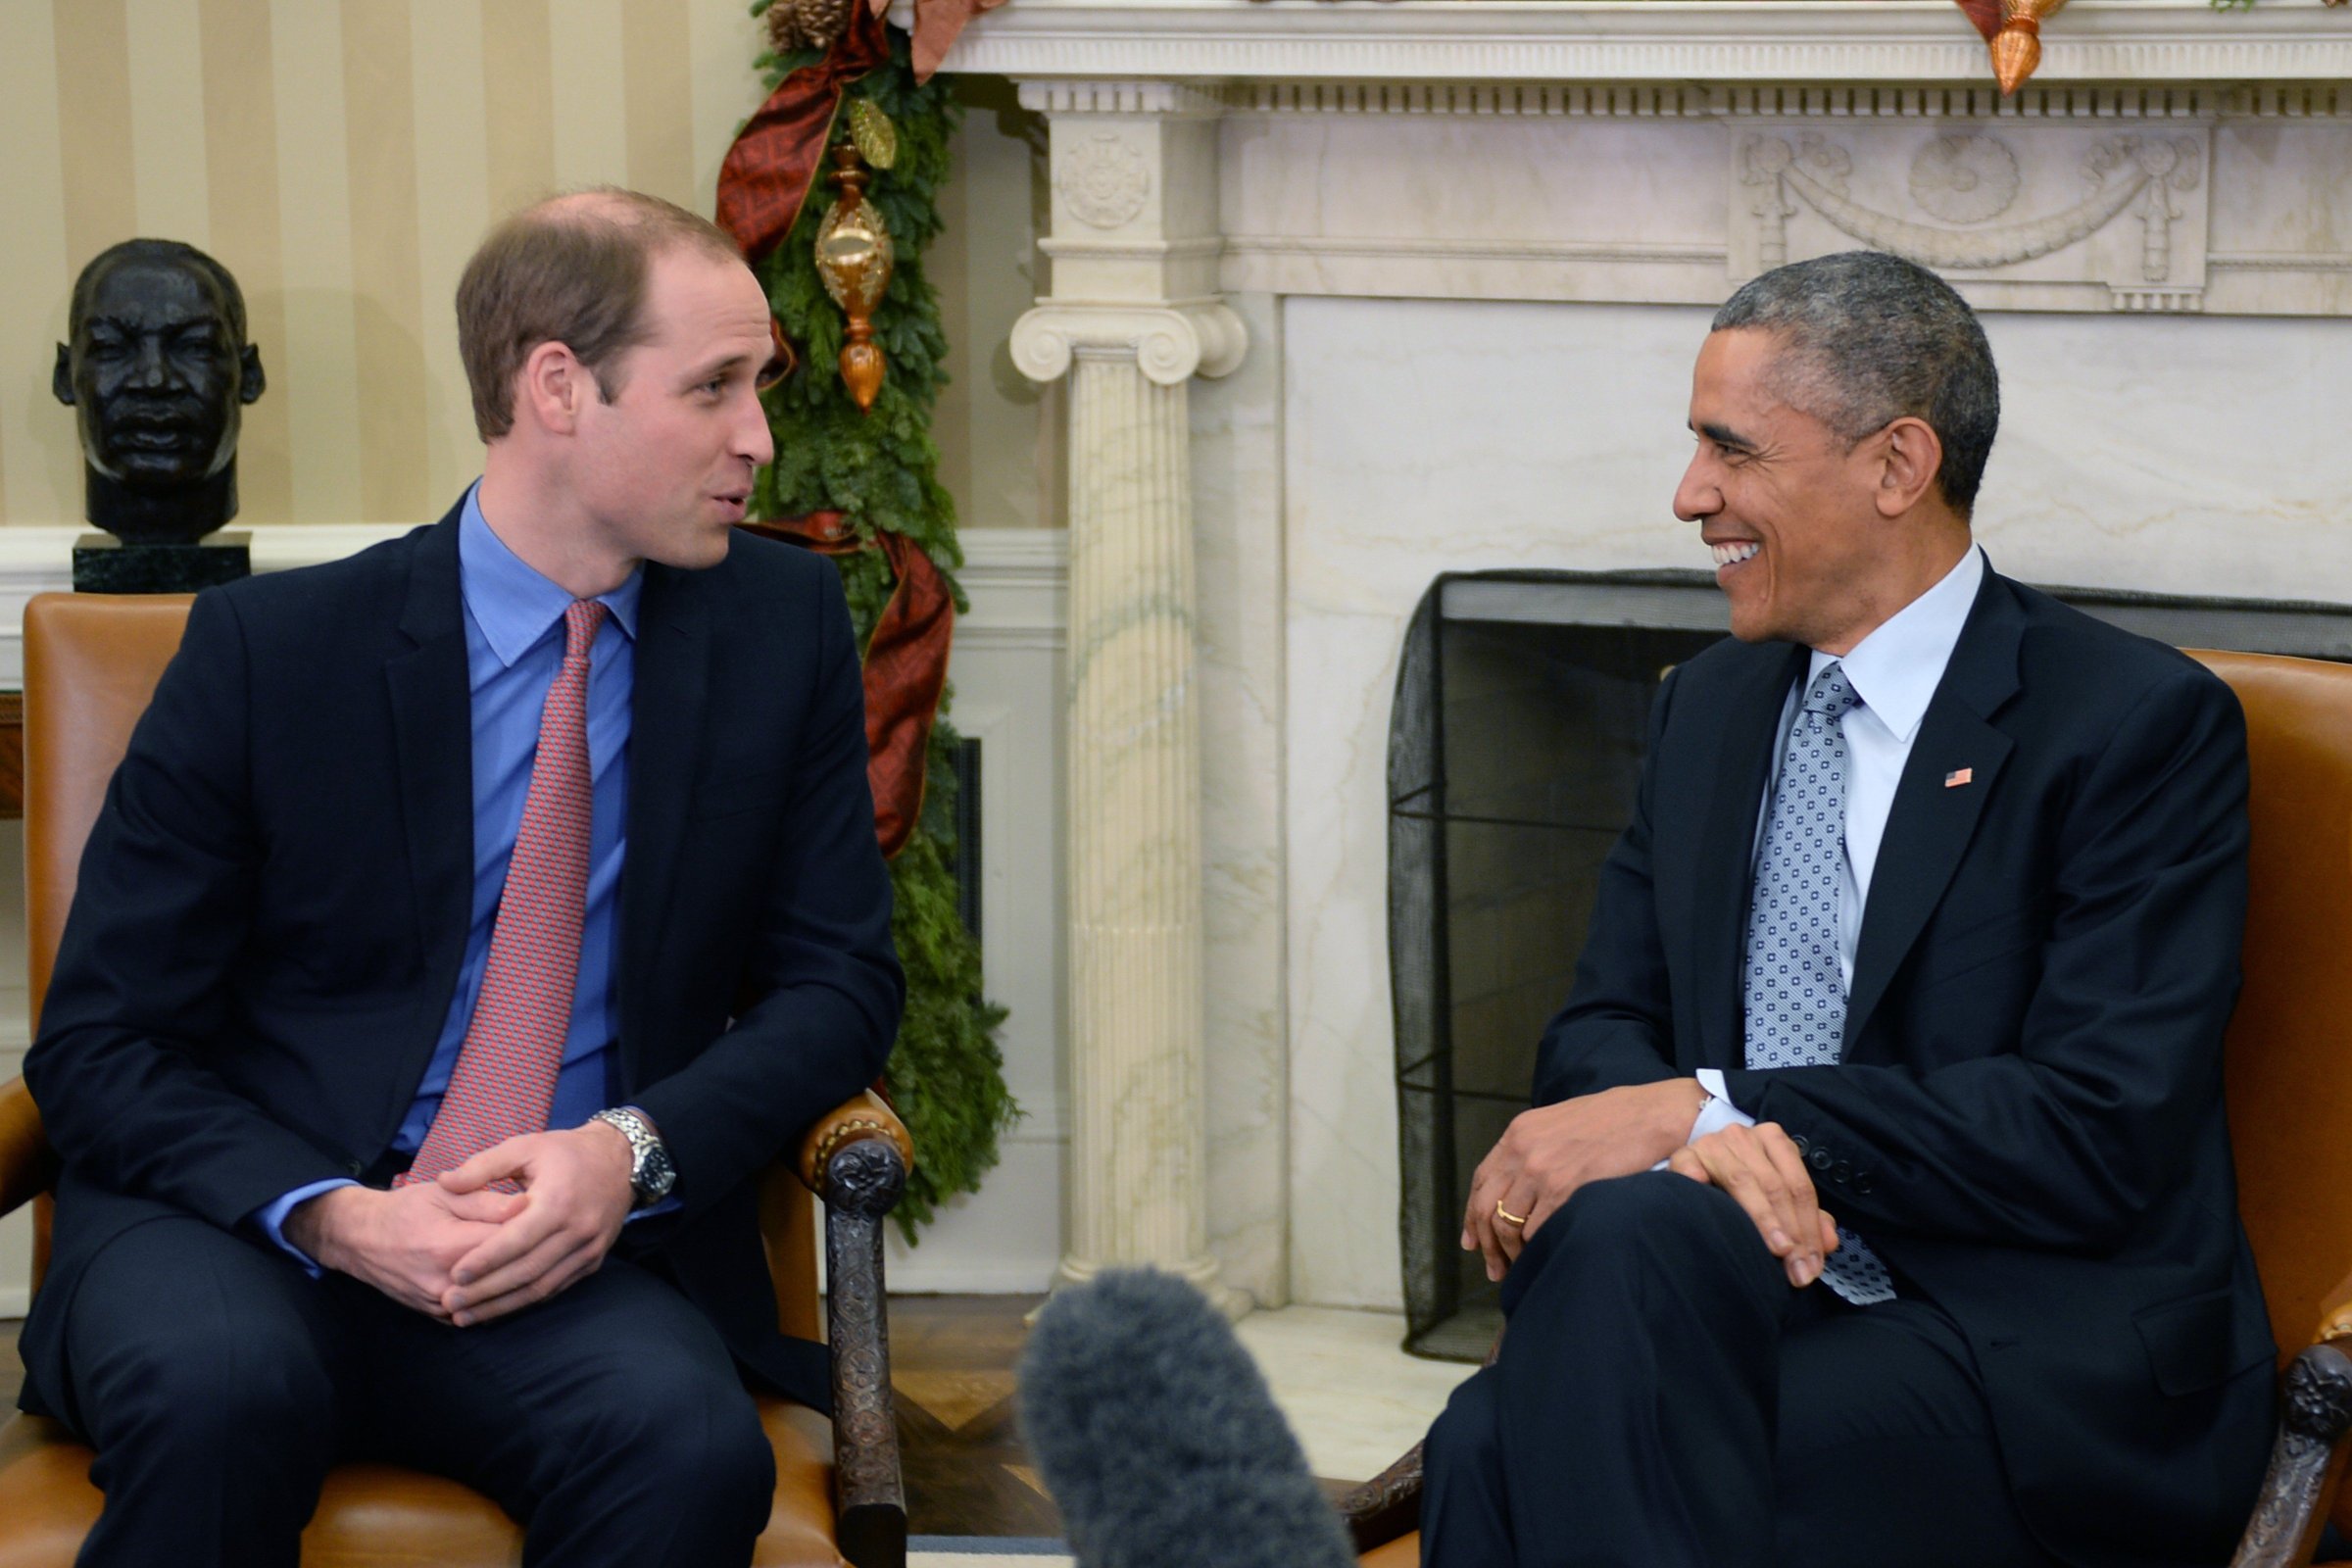 President Barack Obama welcomes Prince William, the Duke of Cambridge, for a meeting in the Oval Off